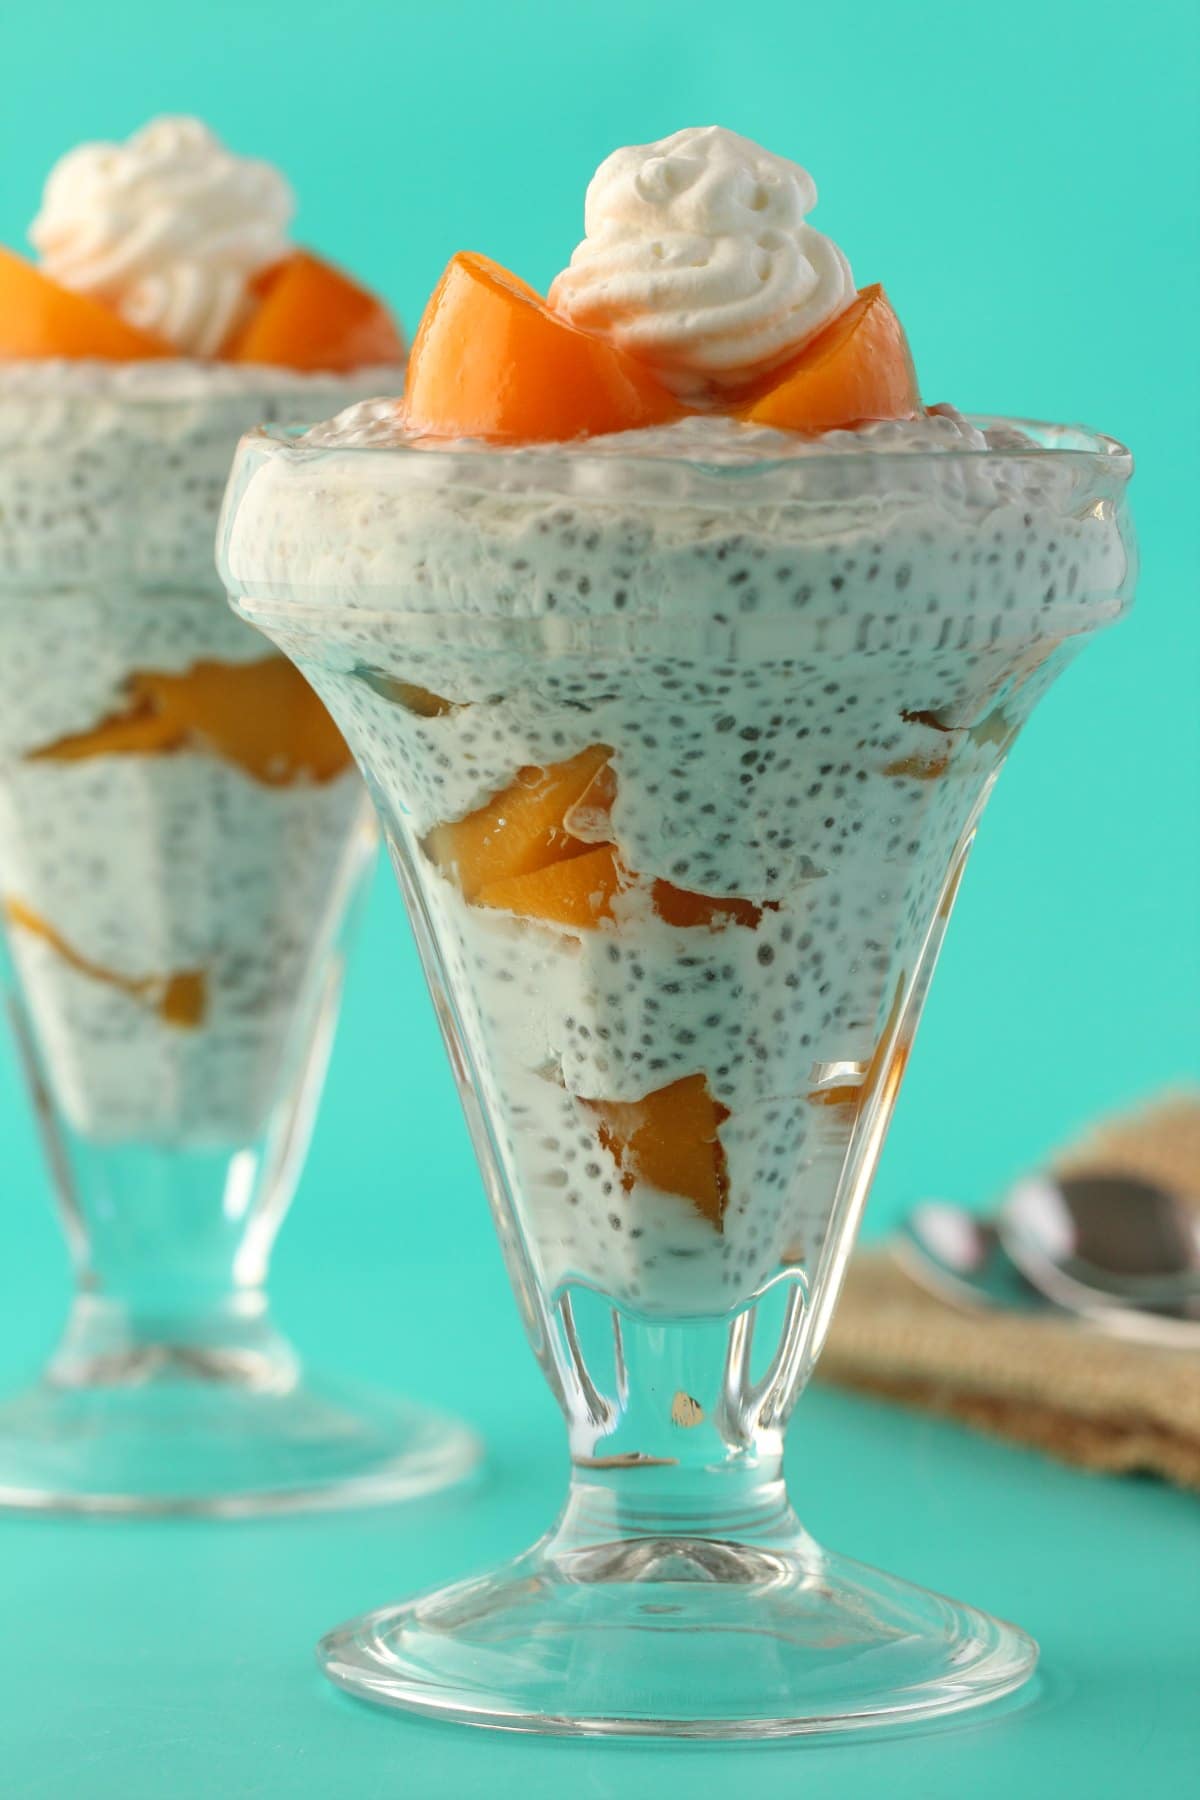 Chia pudding in sundae glasses with canned peaches. 